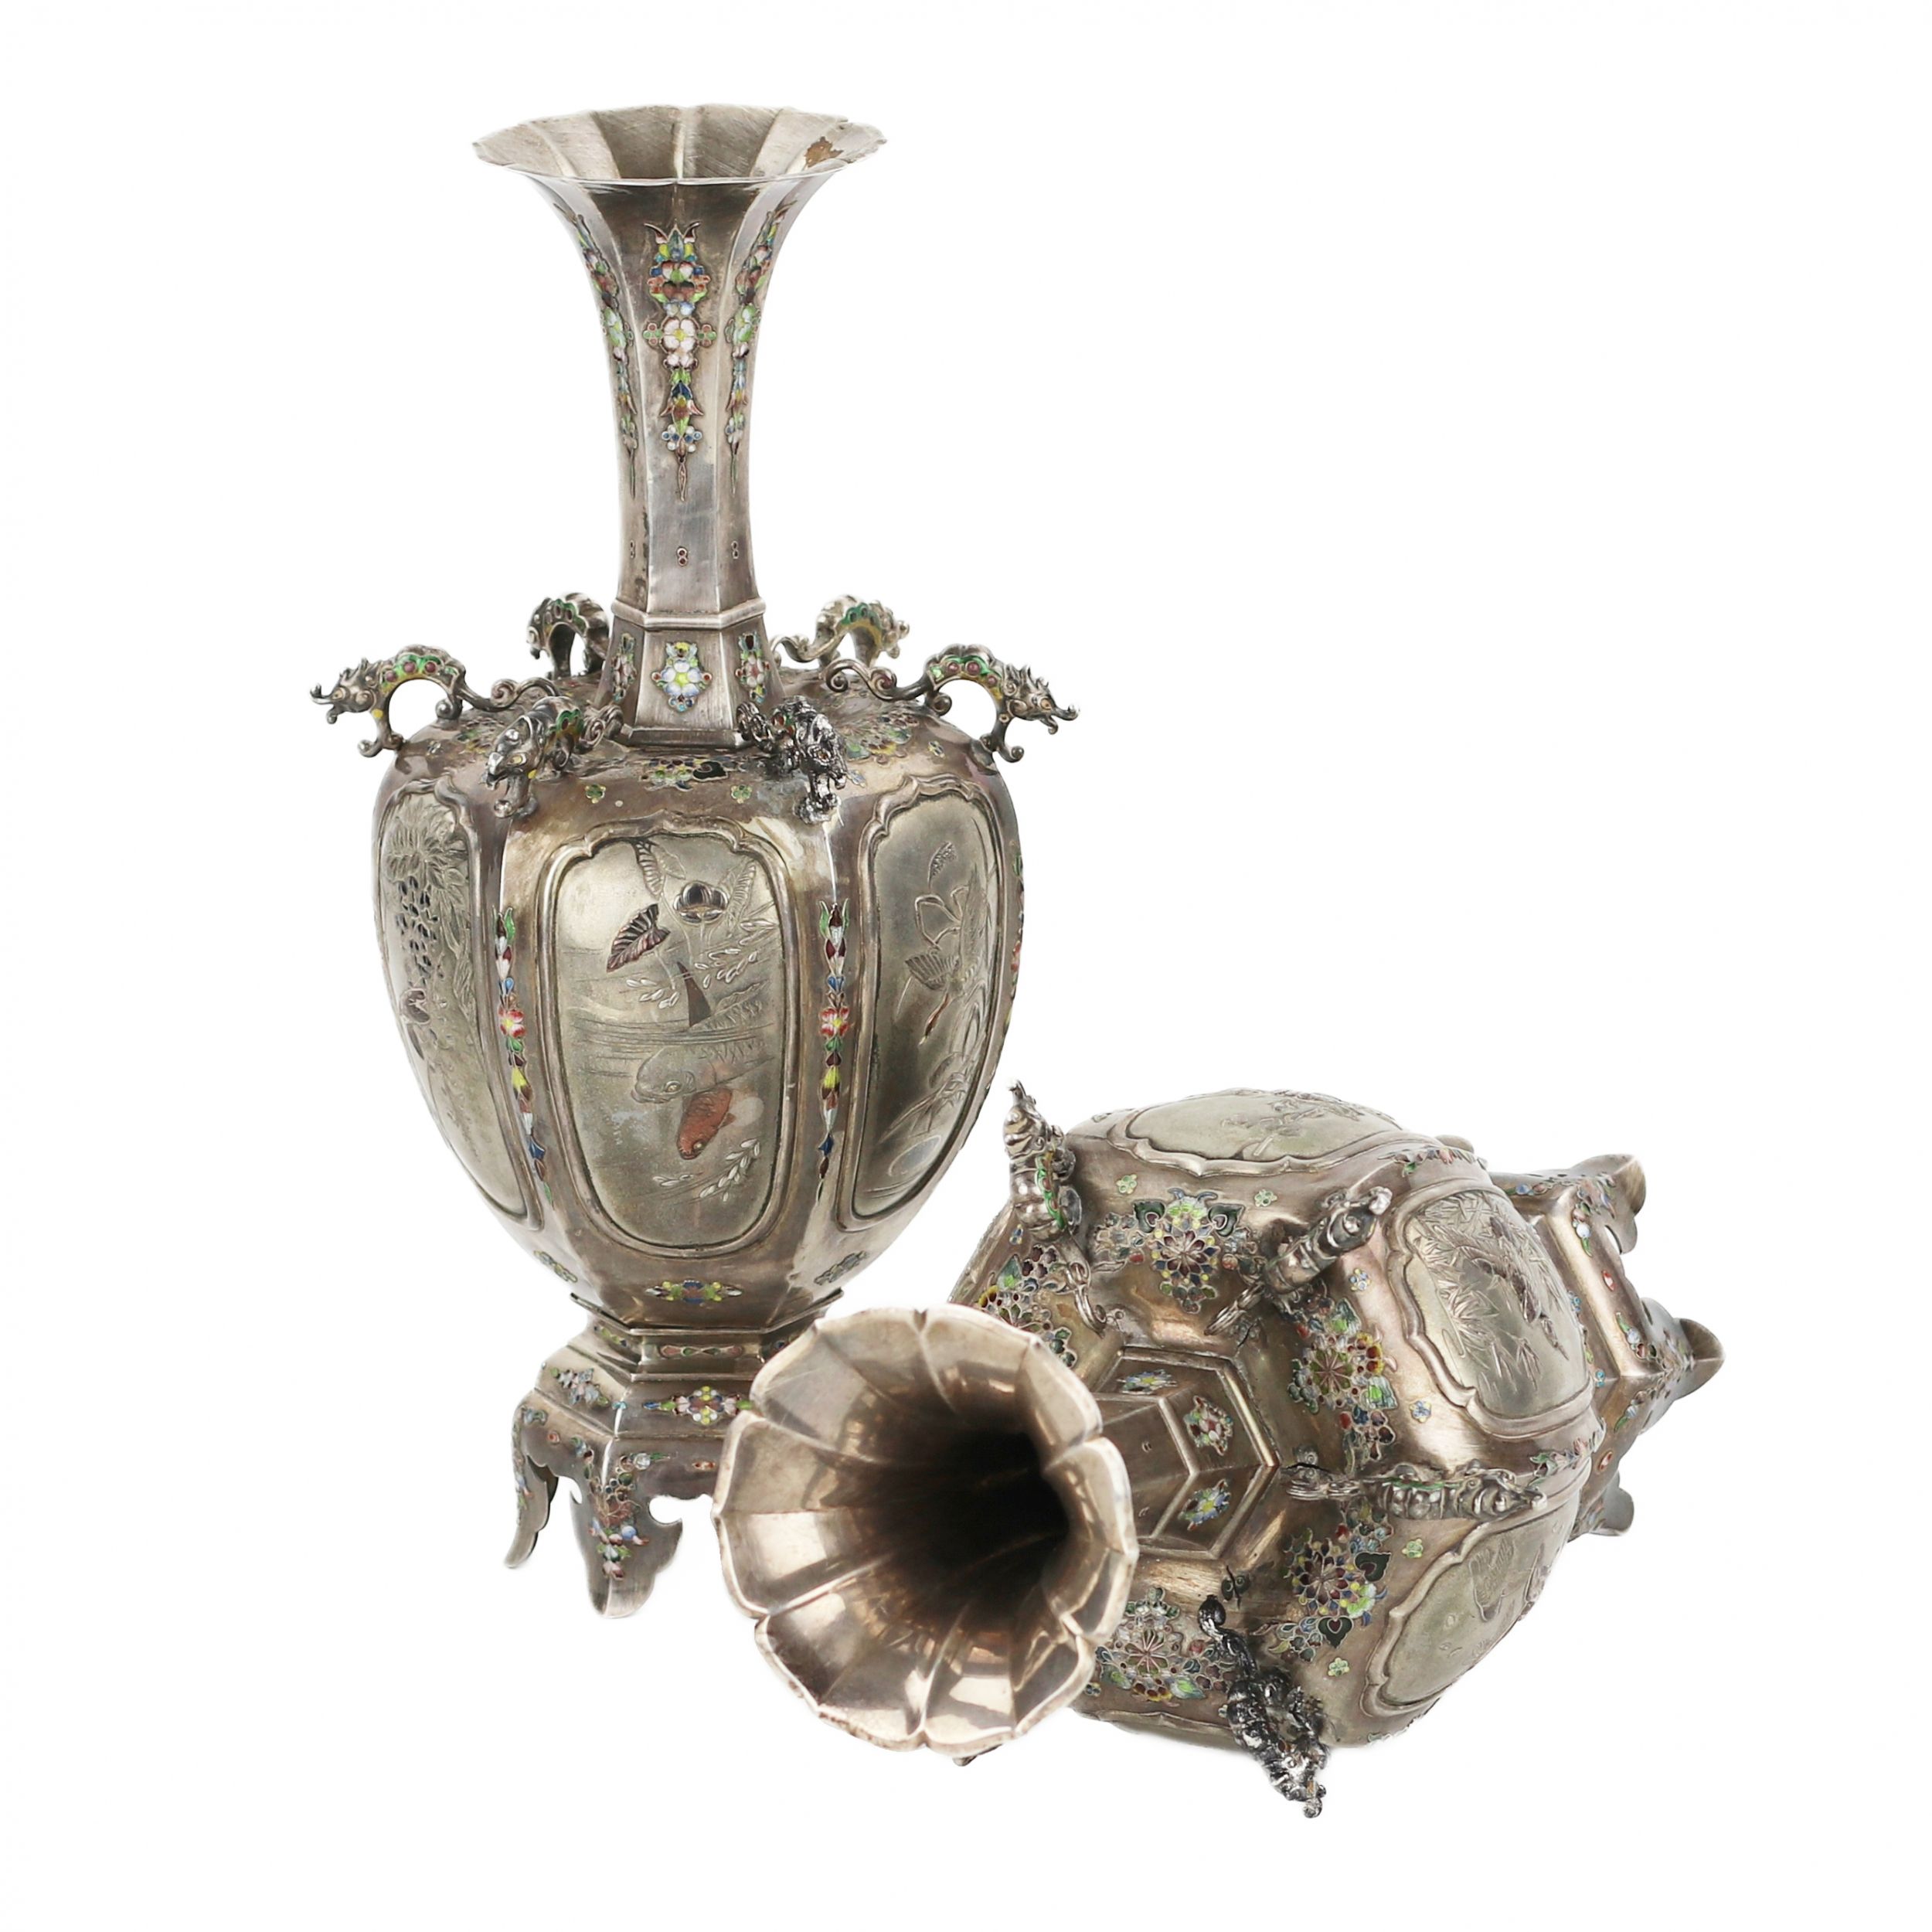 A pair of elegant Japanese vases made of silver and enamel. The turn of the 19th-20th centuries. - Image 4 of 6